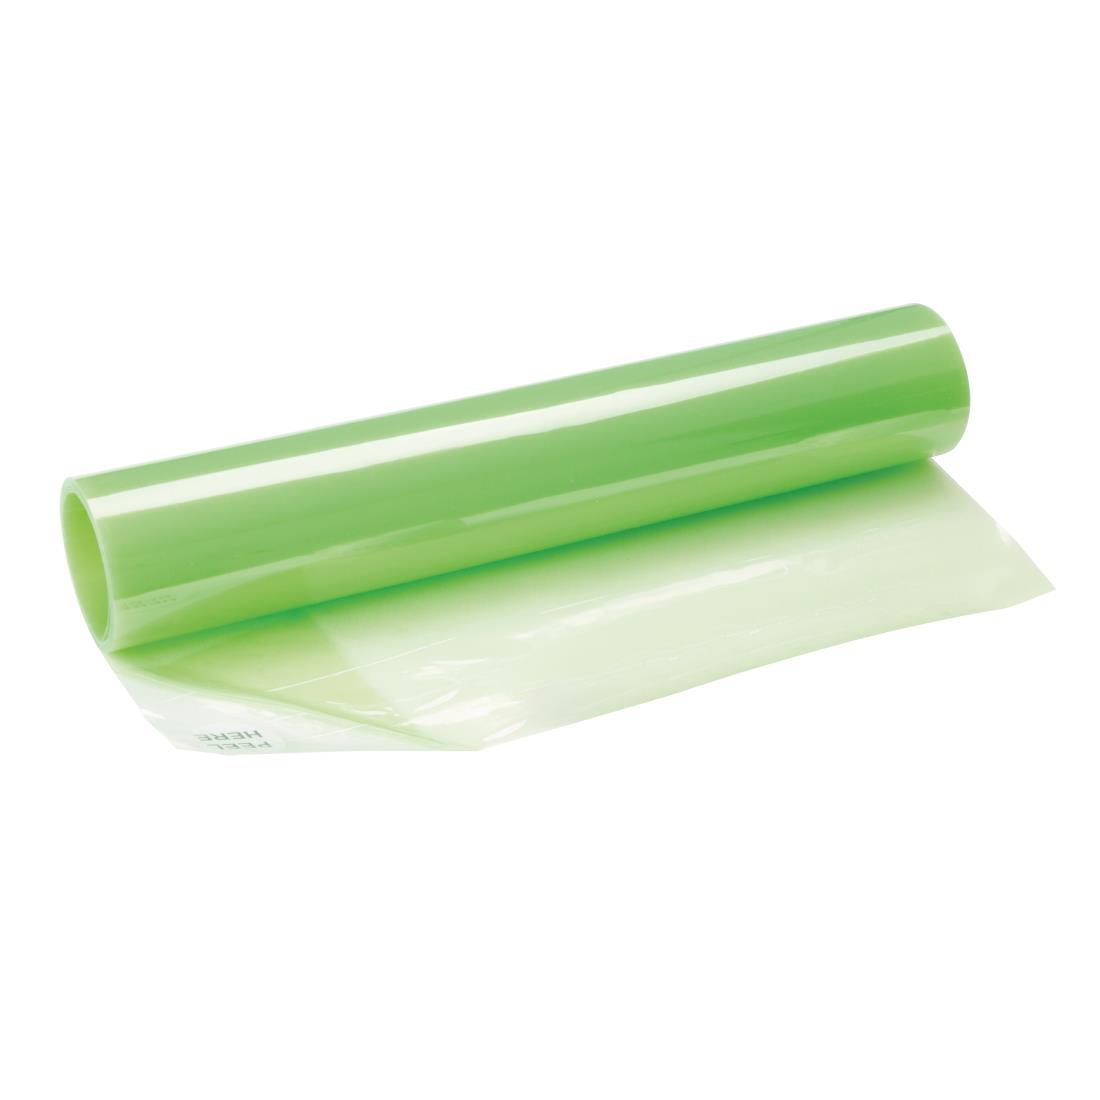 Agreena Three-In-One Reusable Food Wrap 1500 x 300mm - FD933  - 2